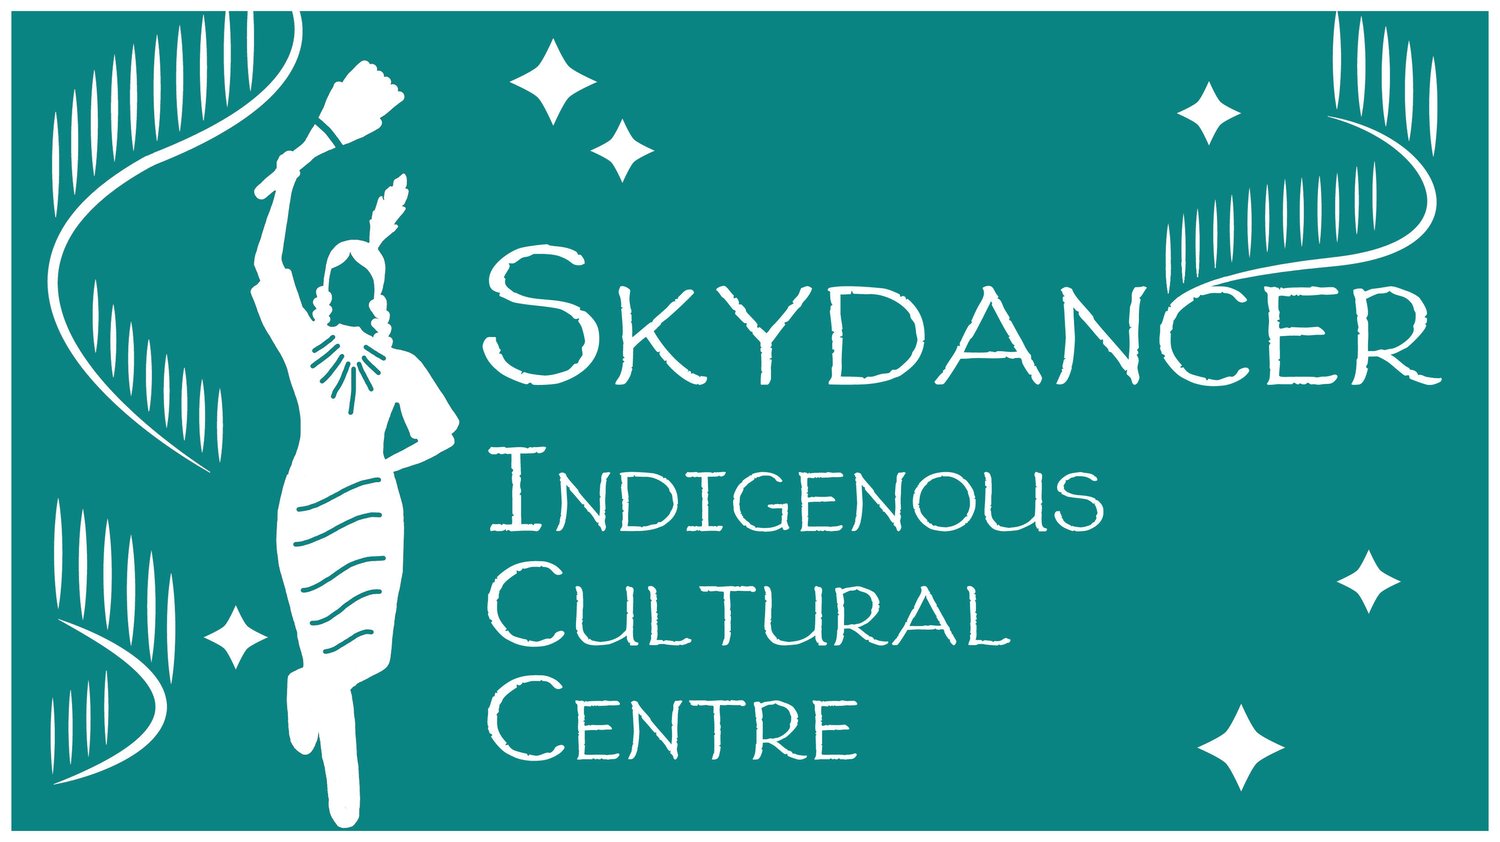 Skydancer Indigenous Cultural Centre and Art Gallery